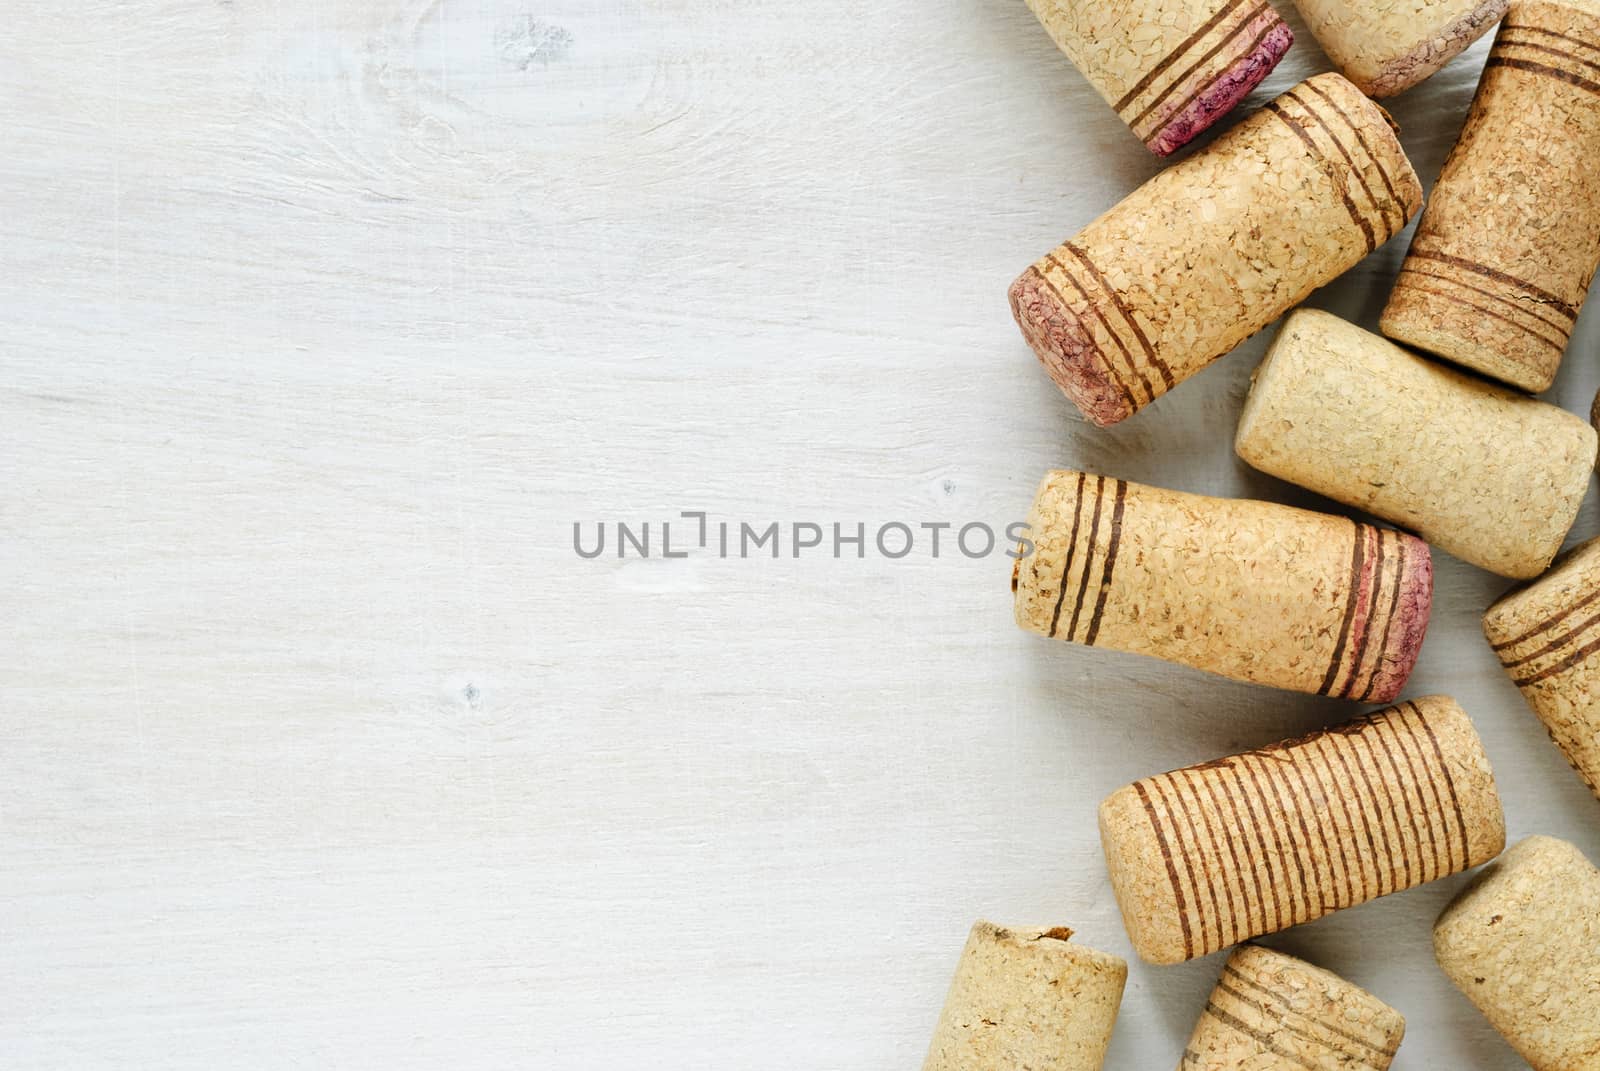 Set of used wine bottle corks, viewed in closeup with white table surface as copy space to the left